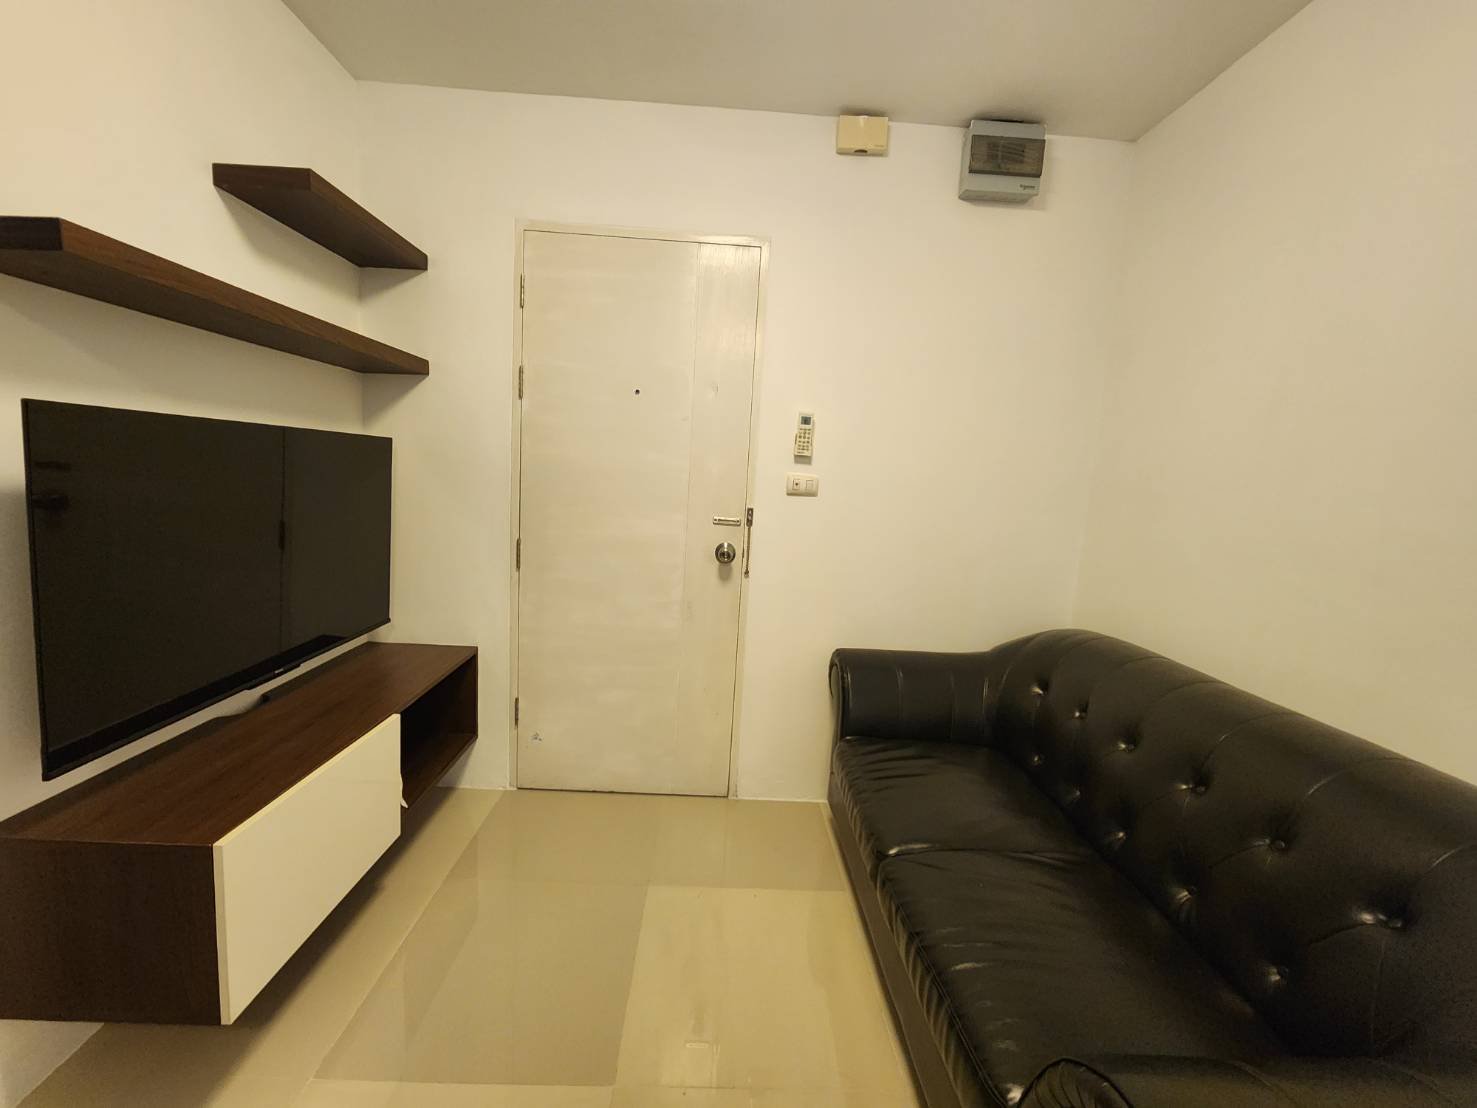 Fully Furnish Condo for rent !! 23 Sq.m Room for SALE at The Avenue Spring!! Nearly ABAC University only 5 minutes